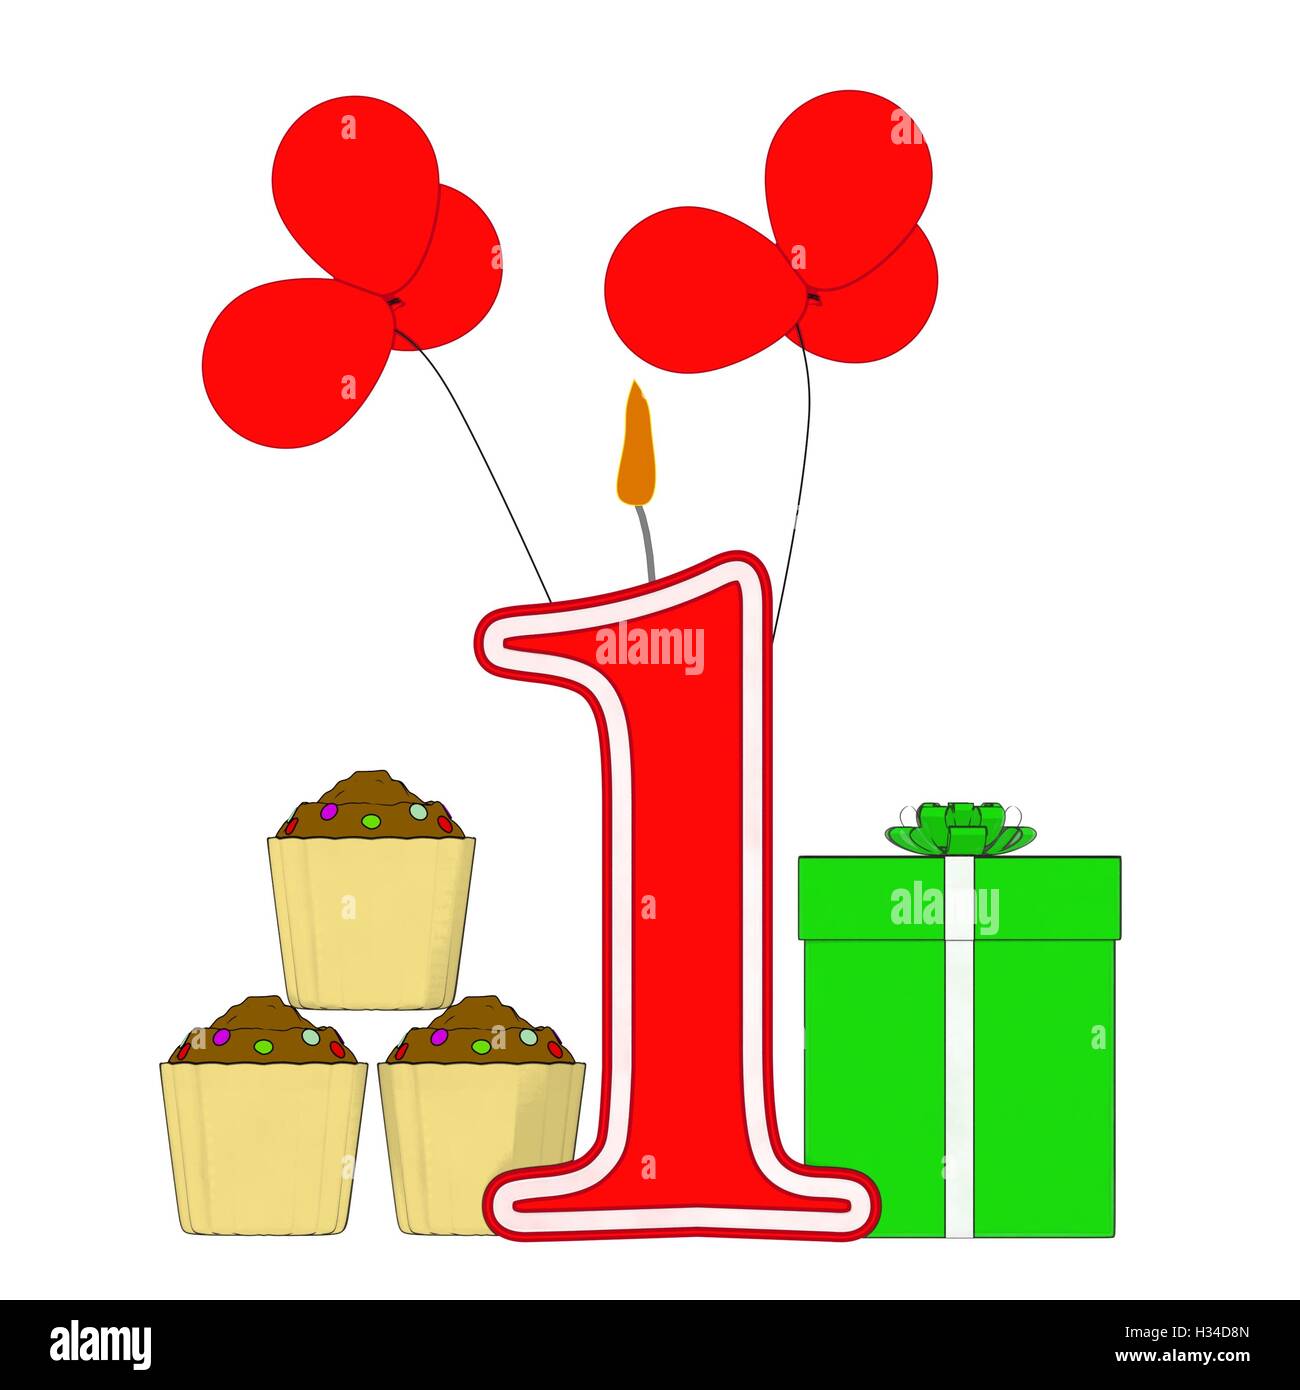 Number One Candle Shows One Year Birthday Party Or Celebration Stock Photo